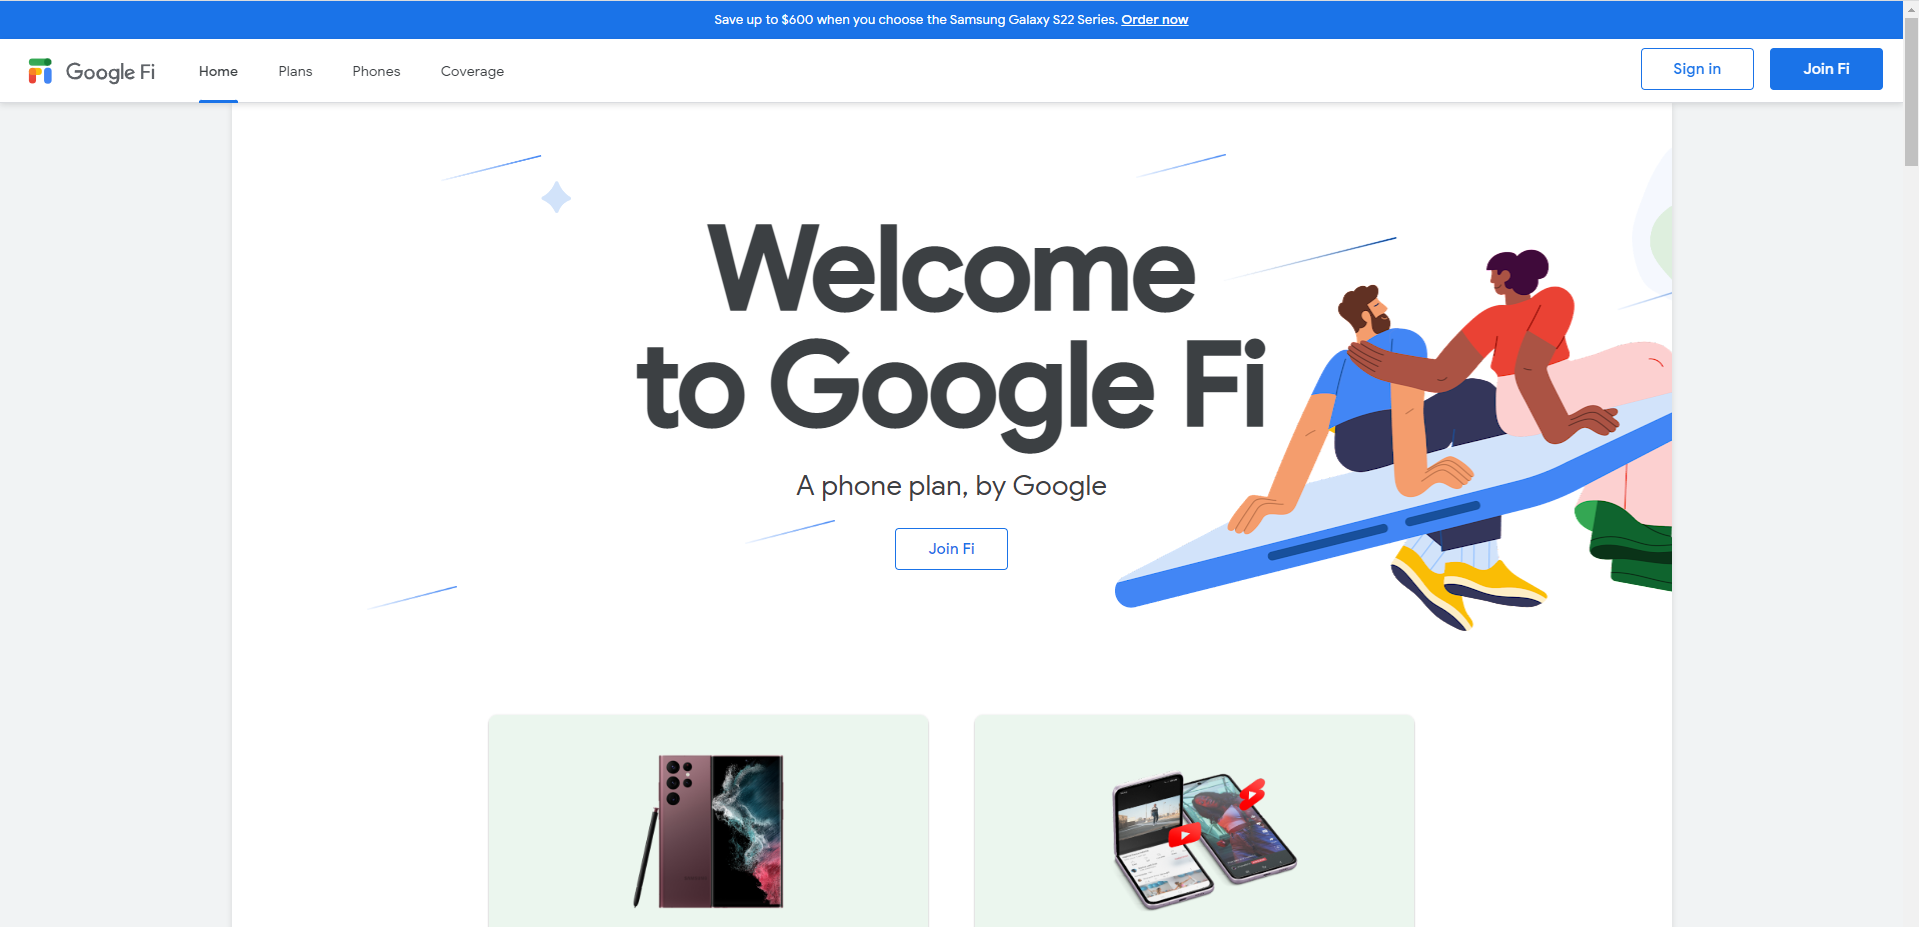 Click Join Fi to activate Google Fi